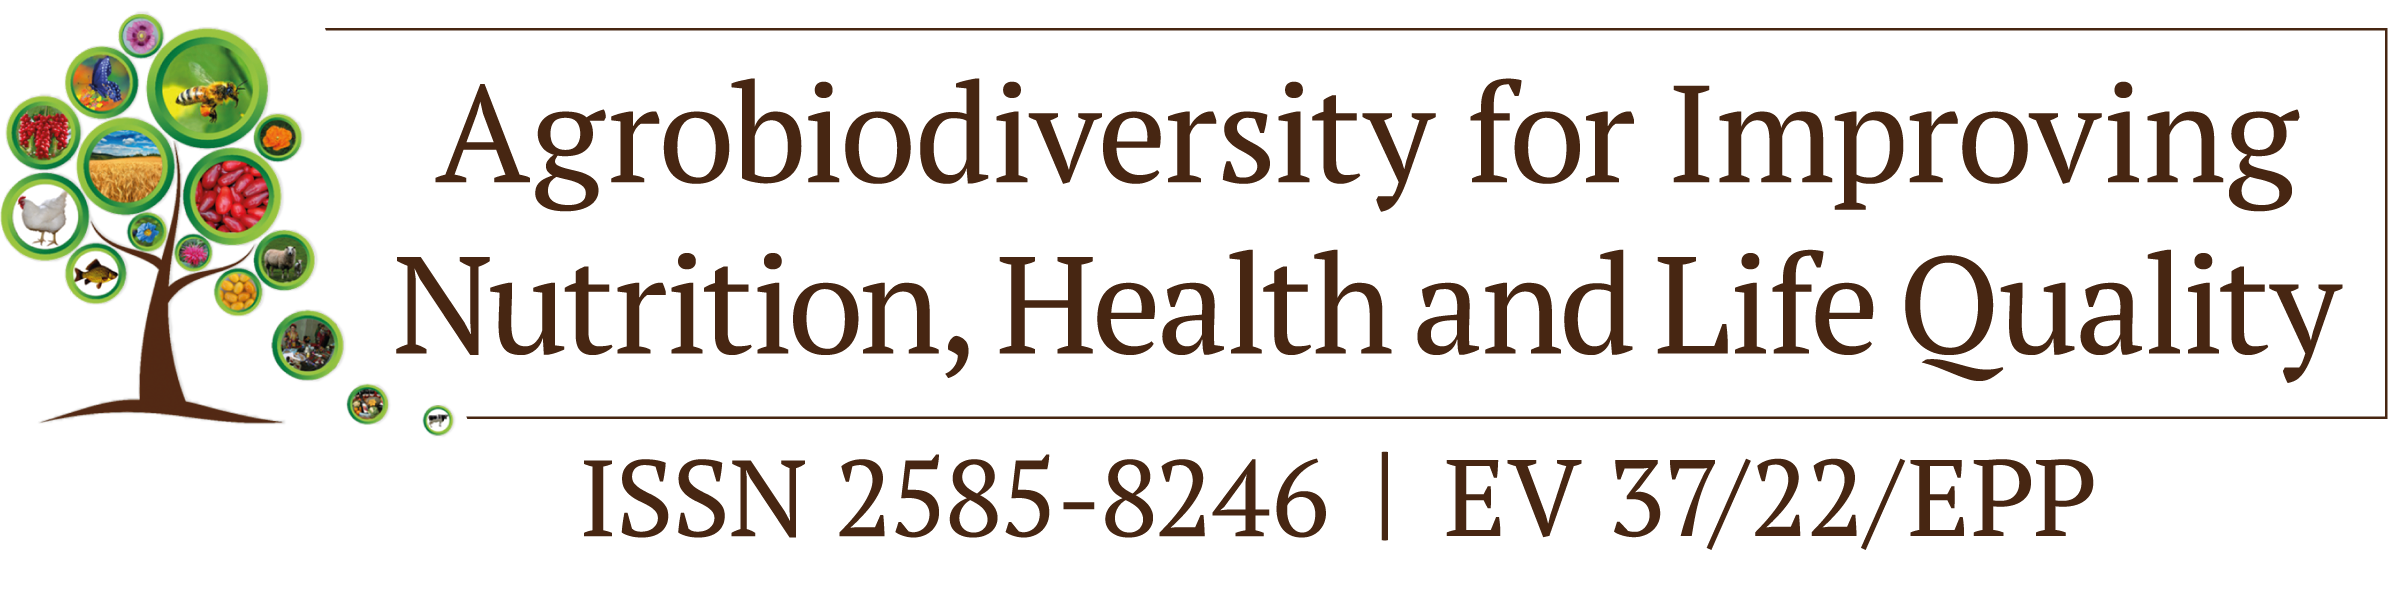 Agrobiodiversity for Improving Nutrition, Health and Life Quality ISSN 2585-8246 | EV 37/22/EPP